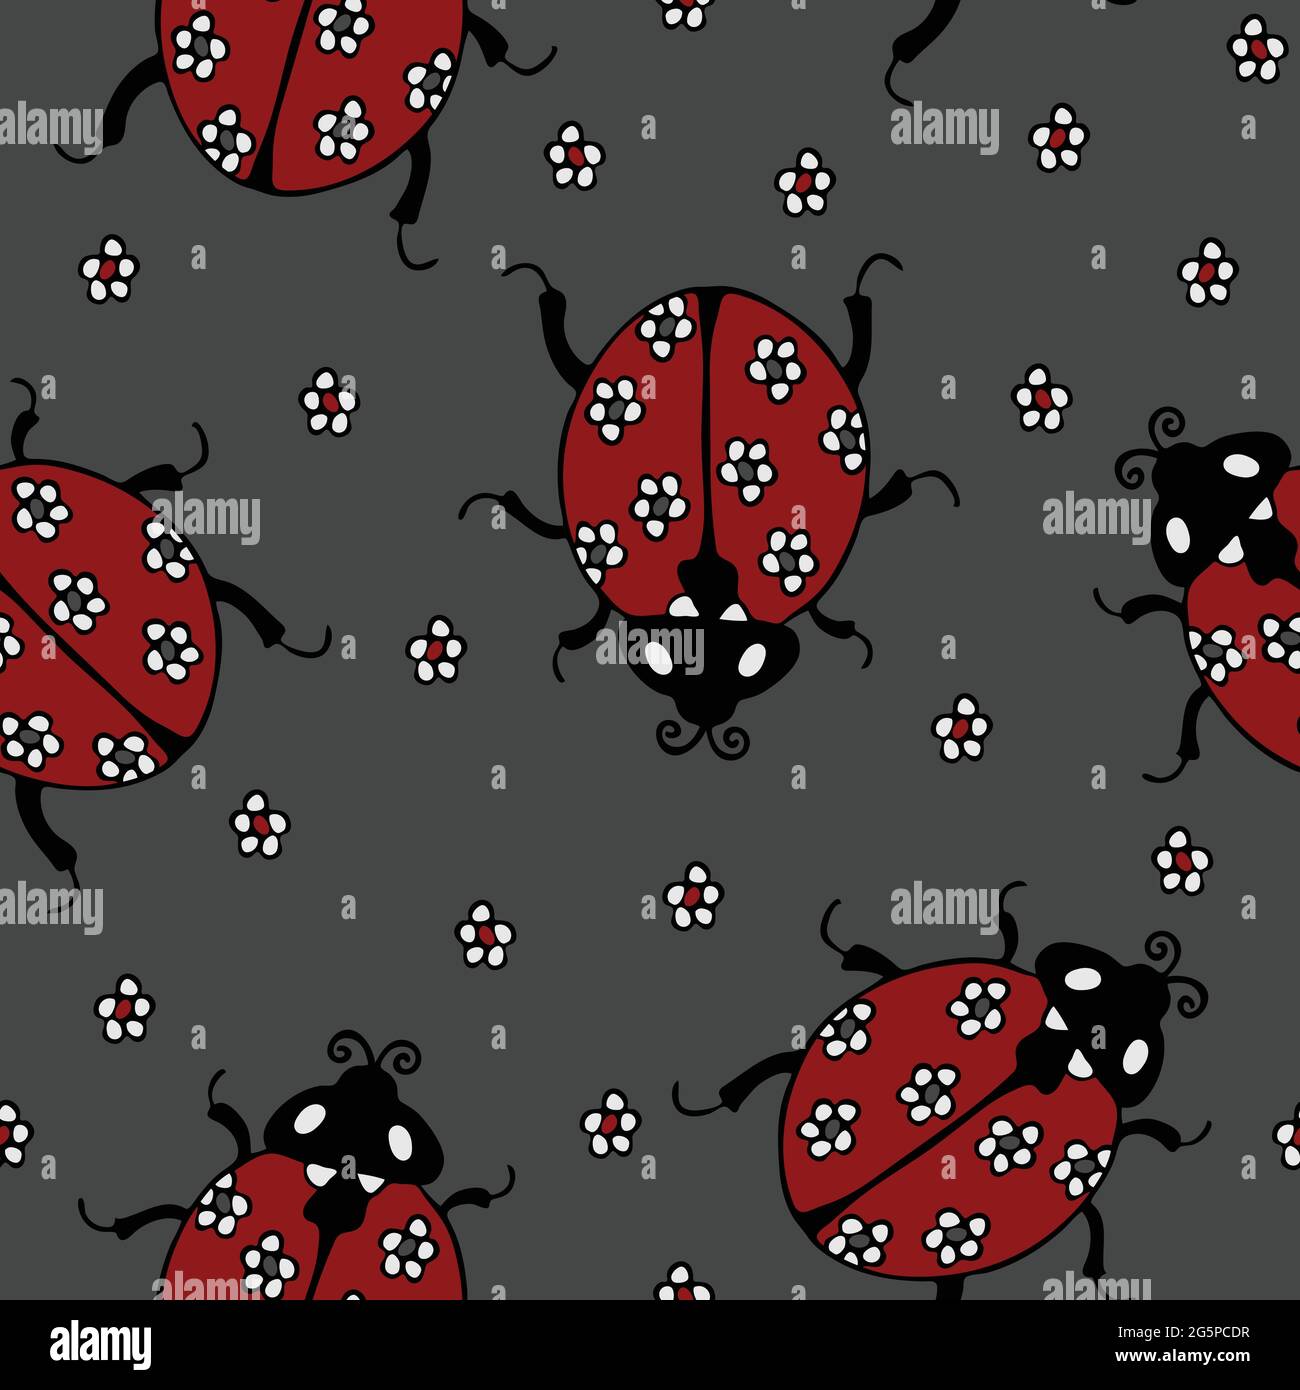 Ladybird wallpapers 4K quality for Android - Download | Cafe Bazaar